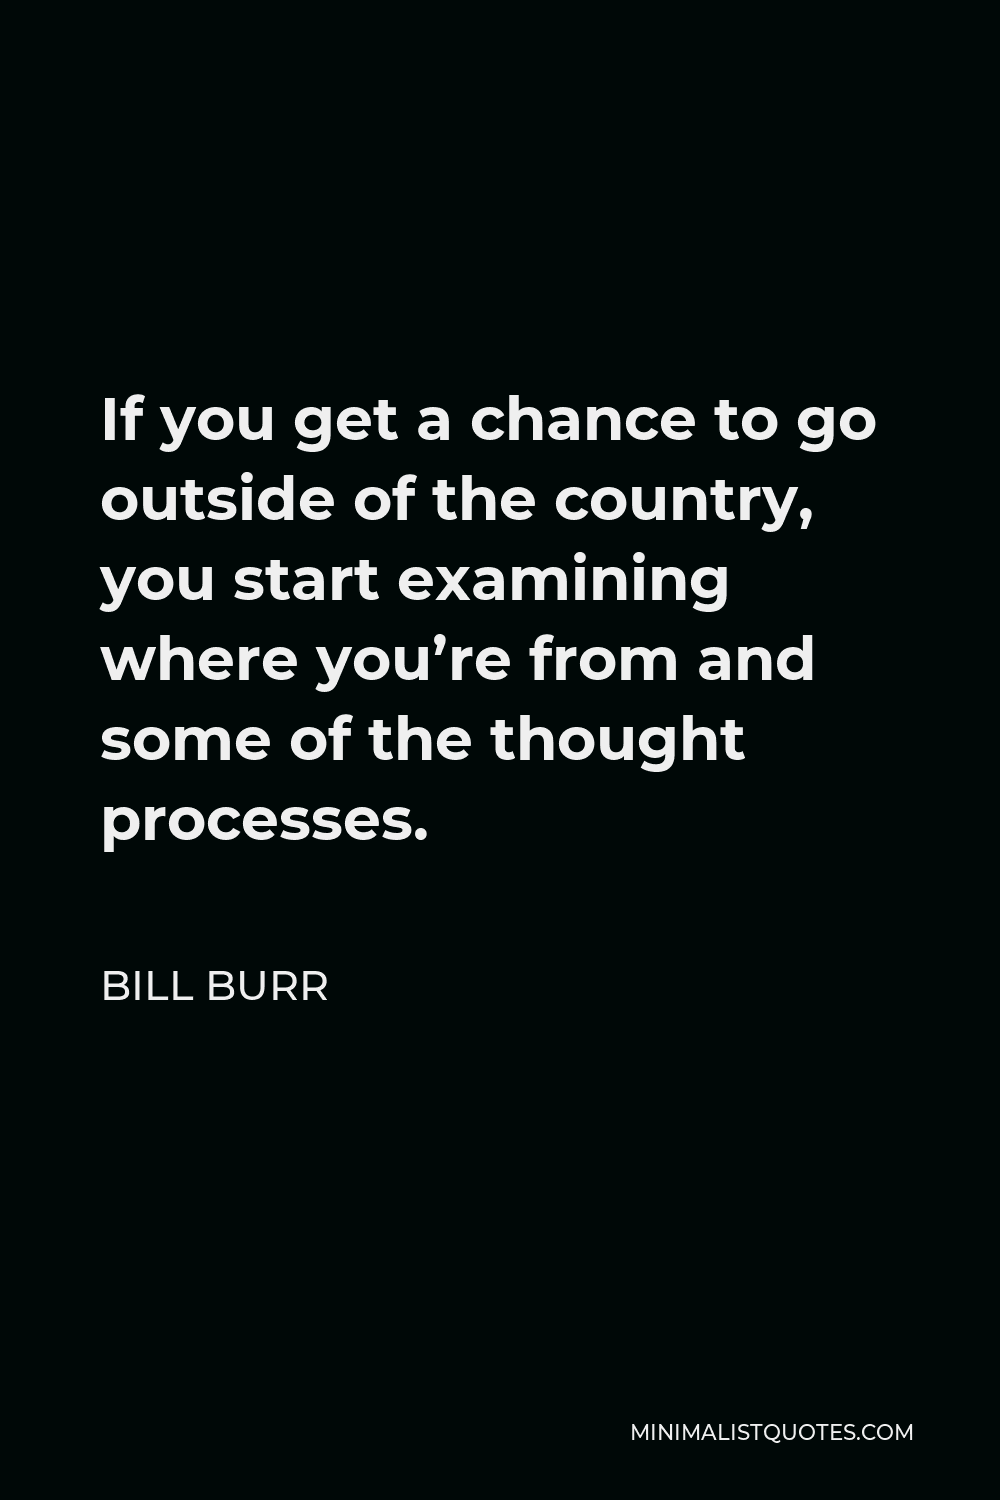 Bill Burr Quote - If you get a chance to go outside of the country, you start examining where you’re from and some of the thought processes.